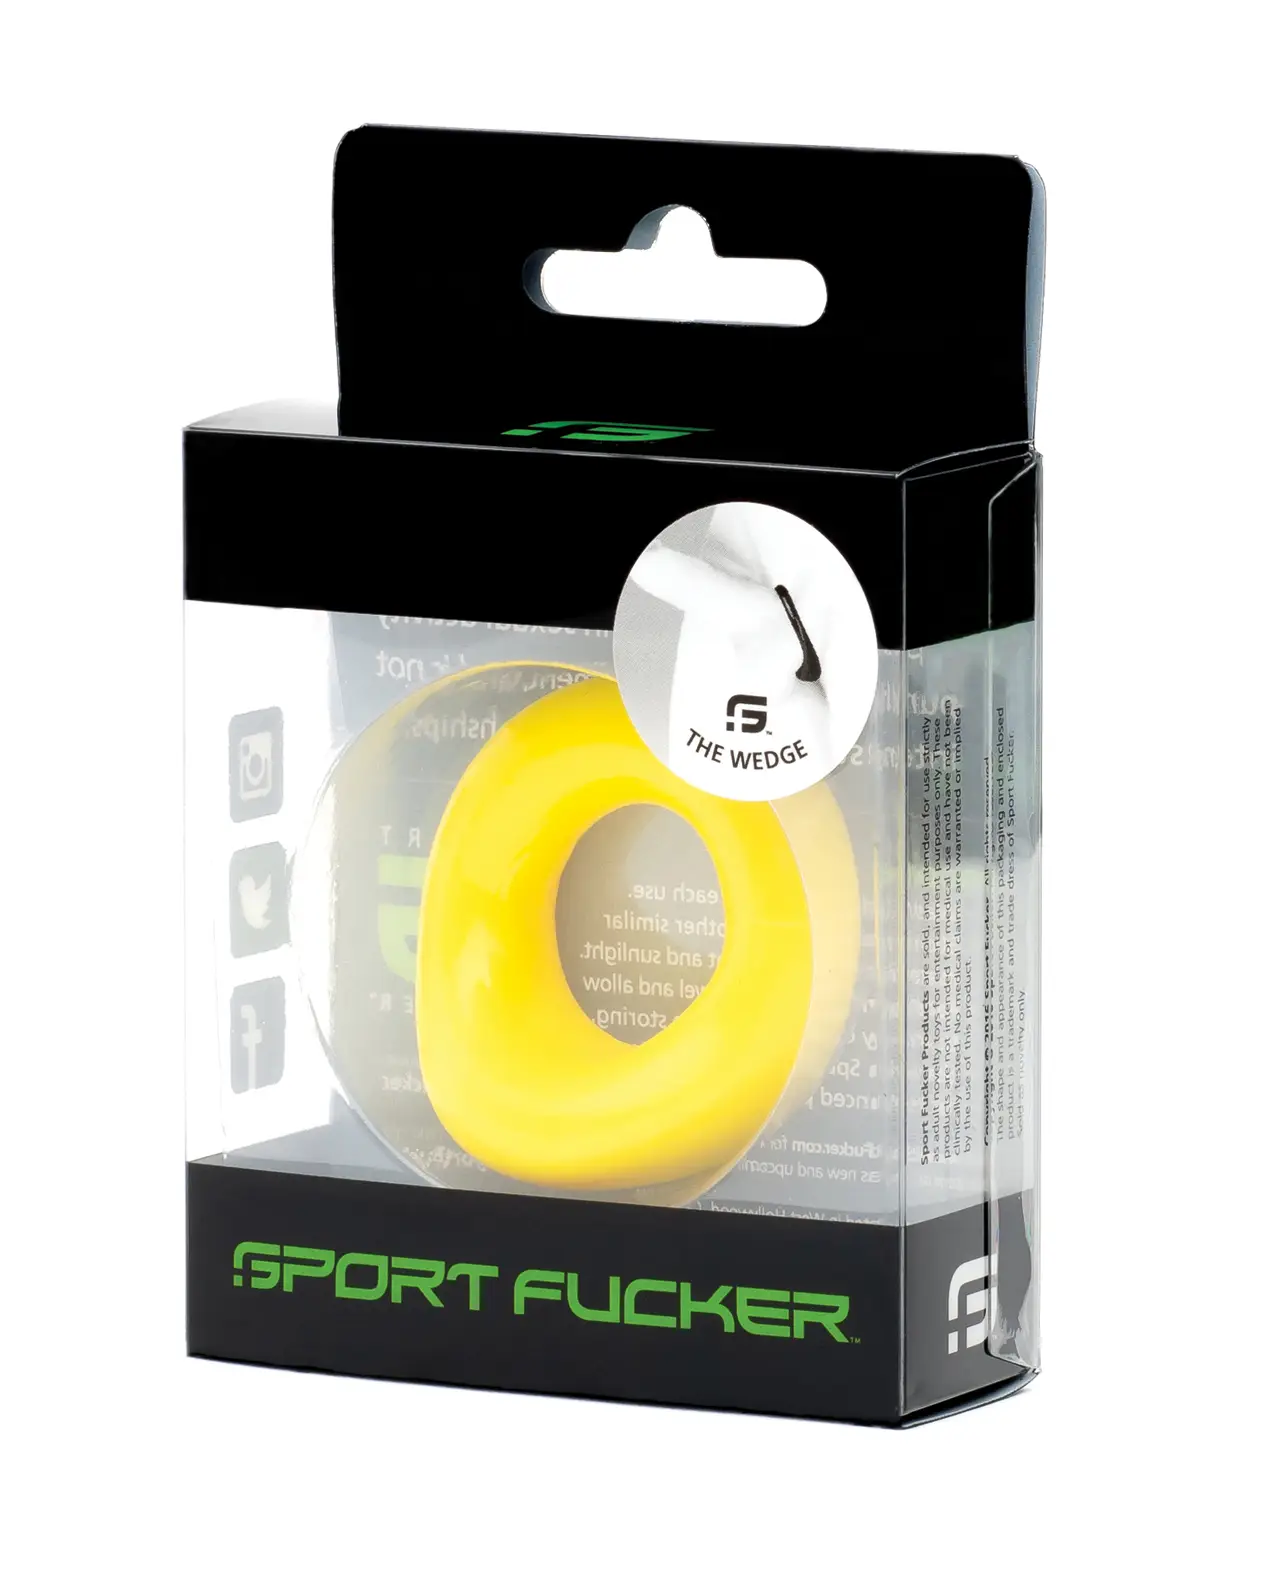 Sport Fucker Silicone The Wedge cock ring in Yellow in a clear and black package that says Sports Fucker in Green along the bottom